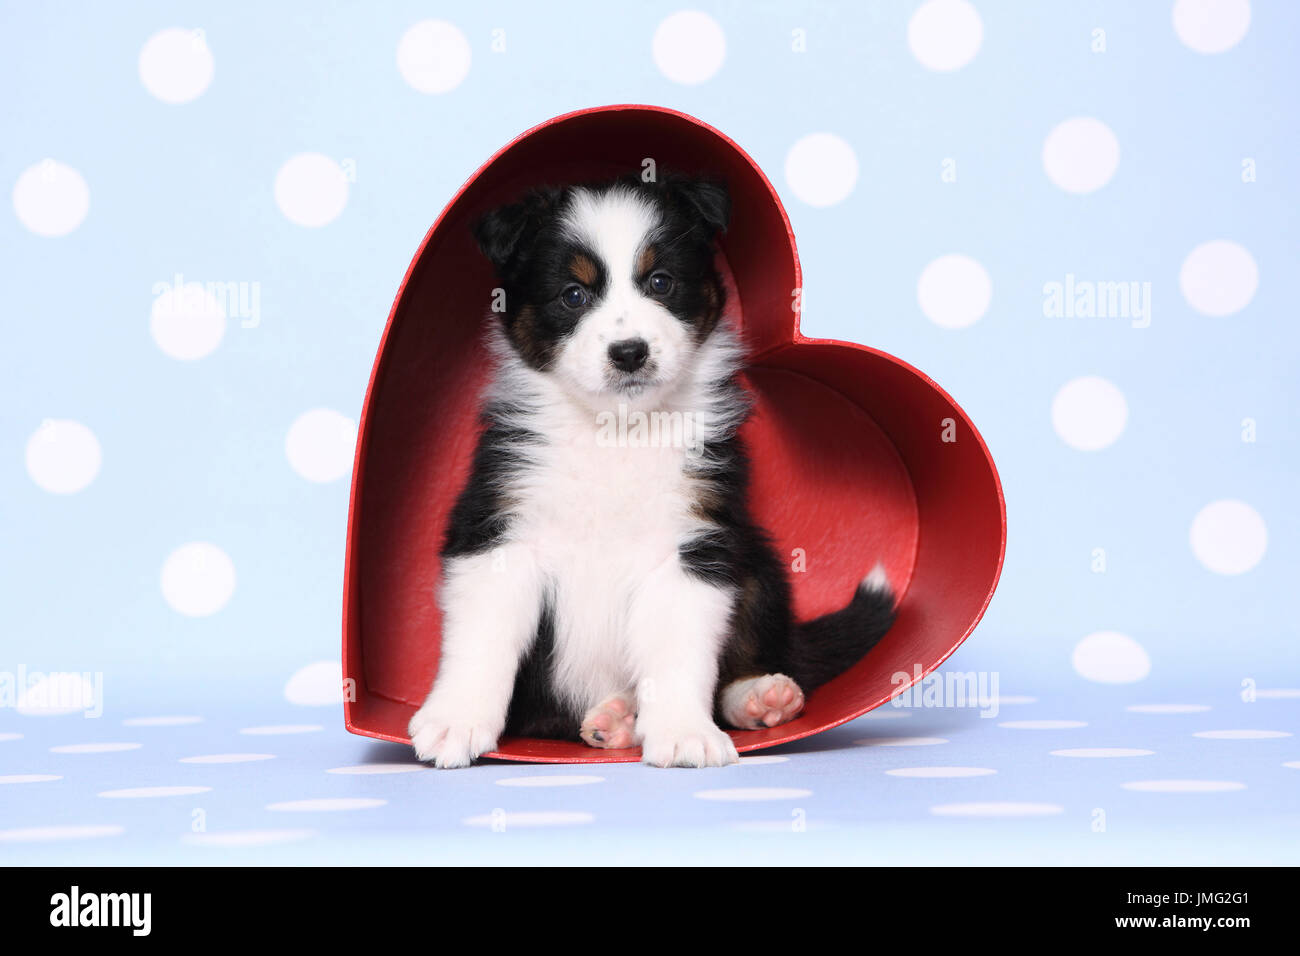 Australian Shepherd. Puppy (6 weeks old) sitting in a red heart made of cardboard. Studio picture against a blue background with white polka dots. Germany Stock Photo